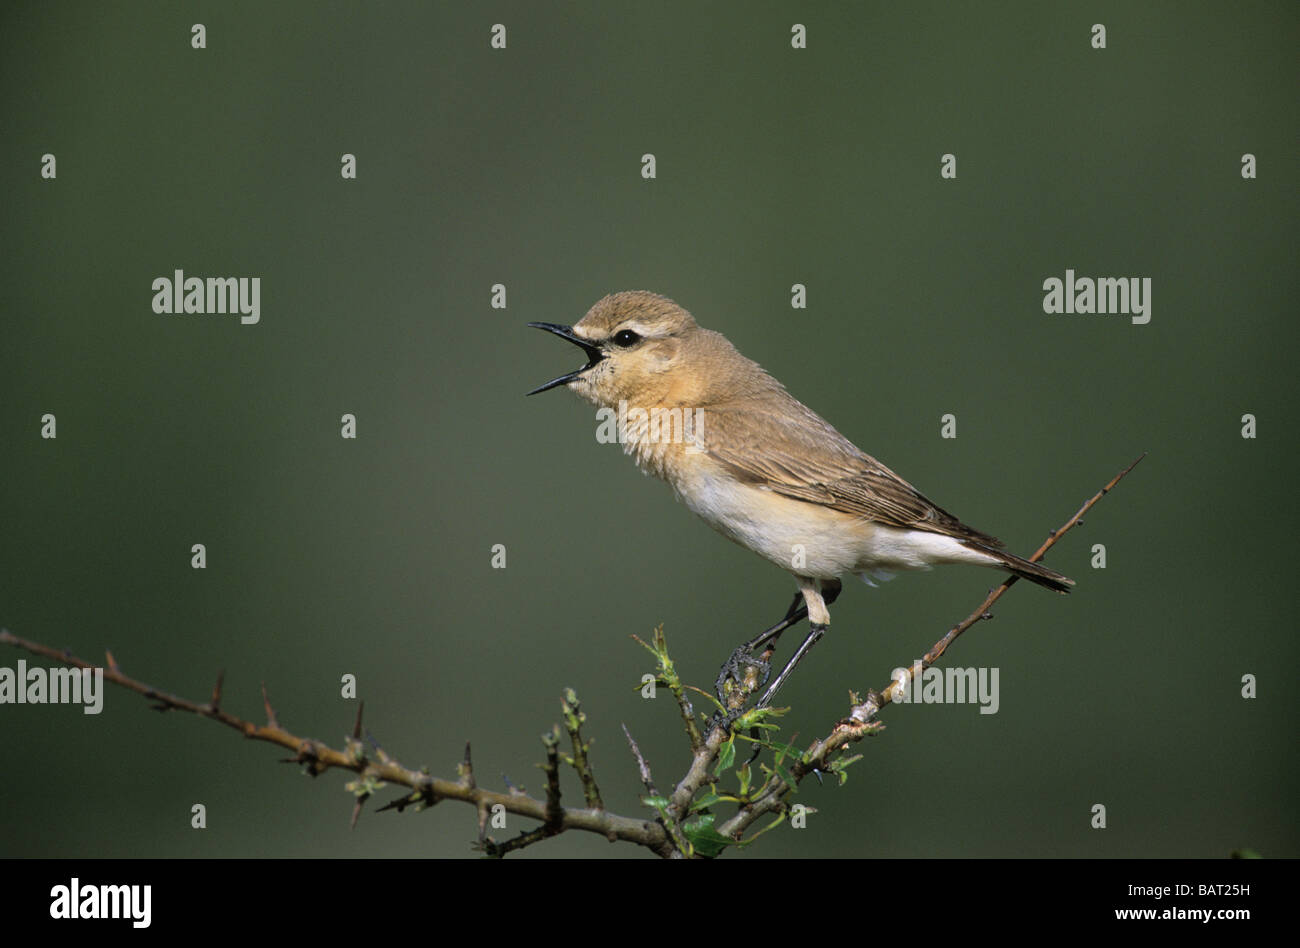 Isabelline Wheatear (Oenanthe isabellina) adult male singing on open perch Lesvos Greece Stock Photo